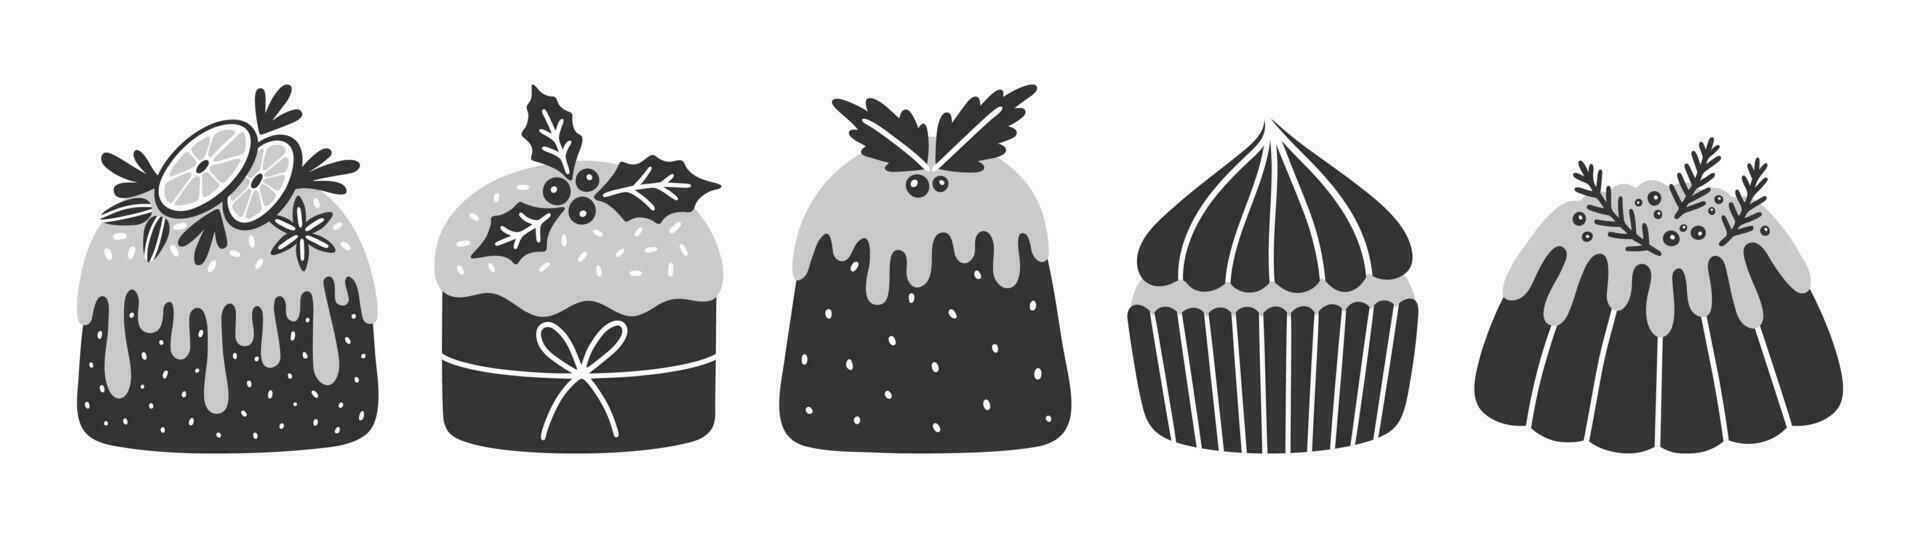 Vector icons of Christmas cakes, and cupcakes.